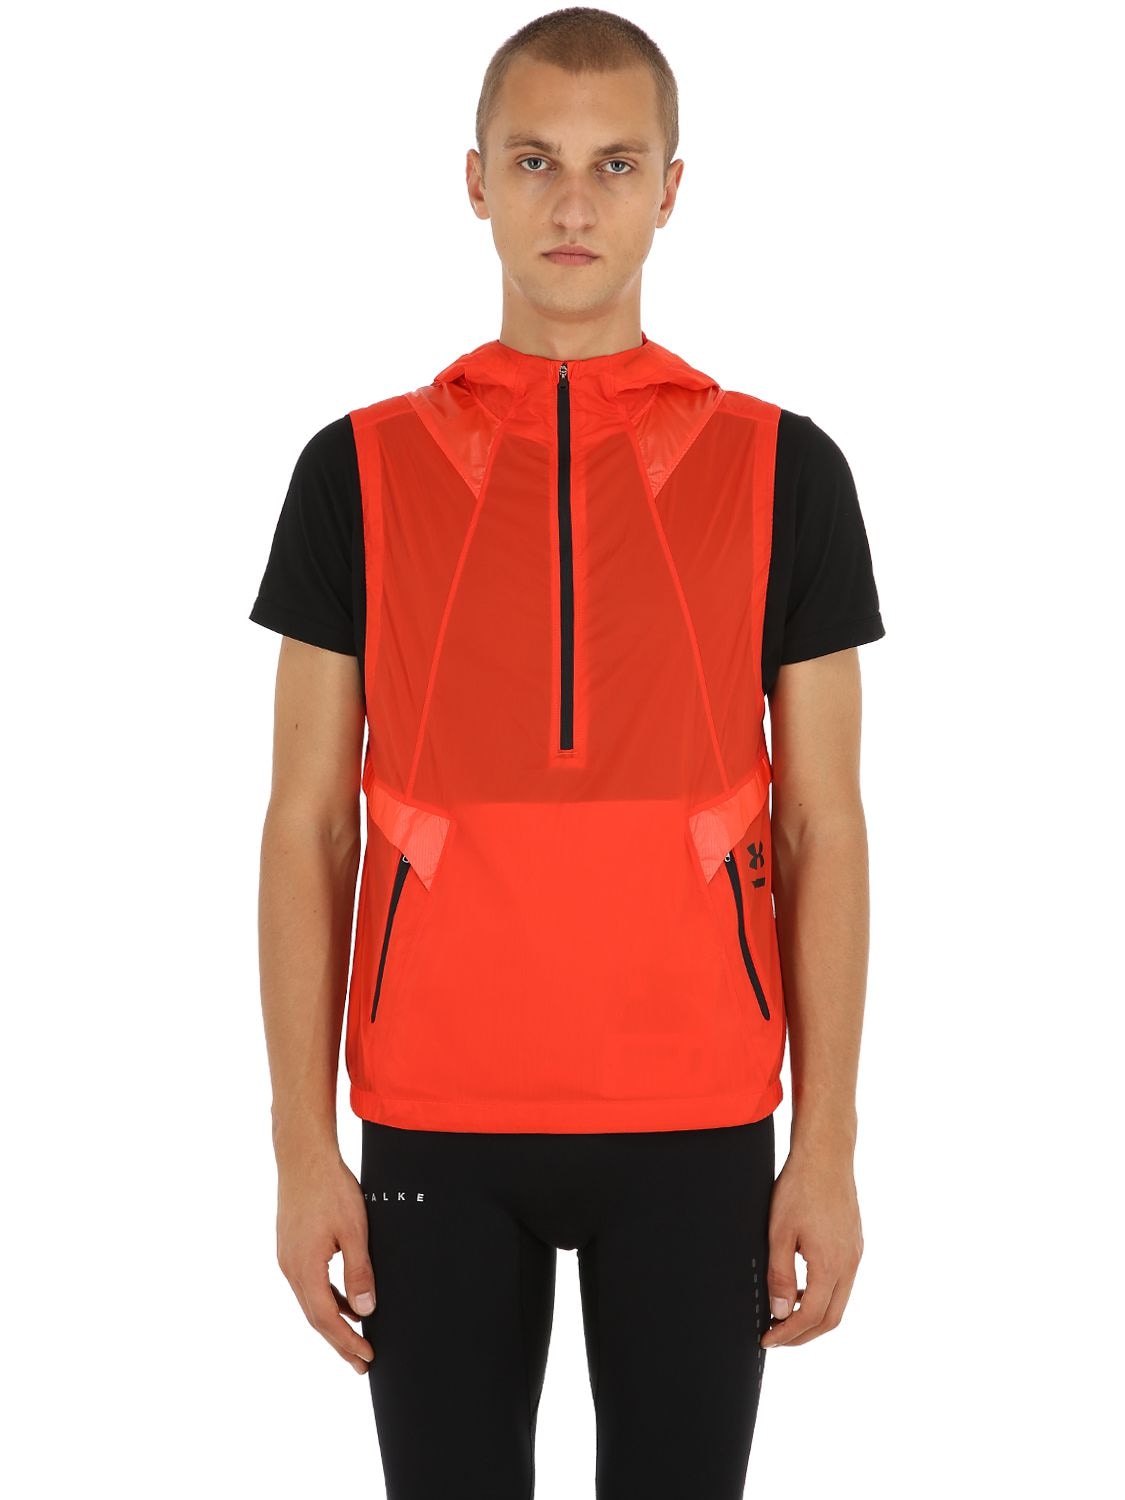 Under Armour Perpetual Performance Vest In Red